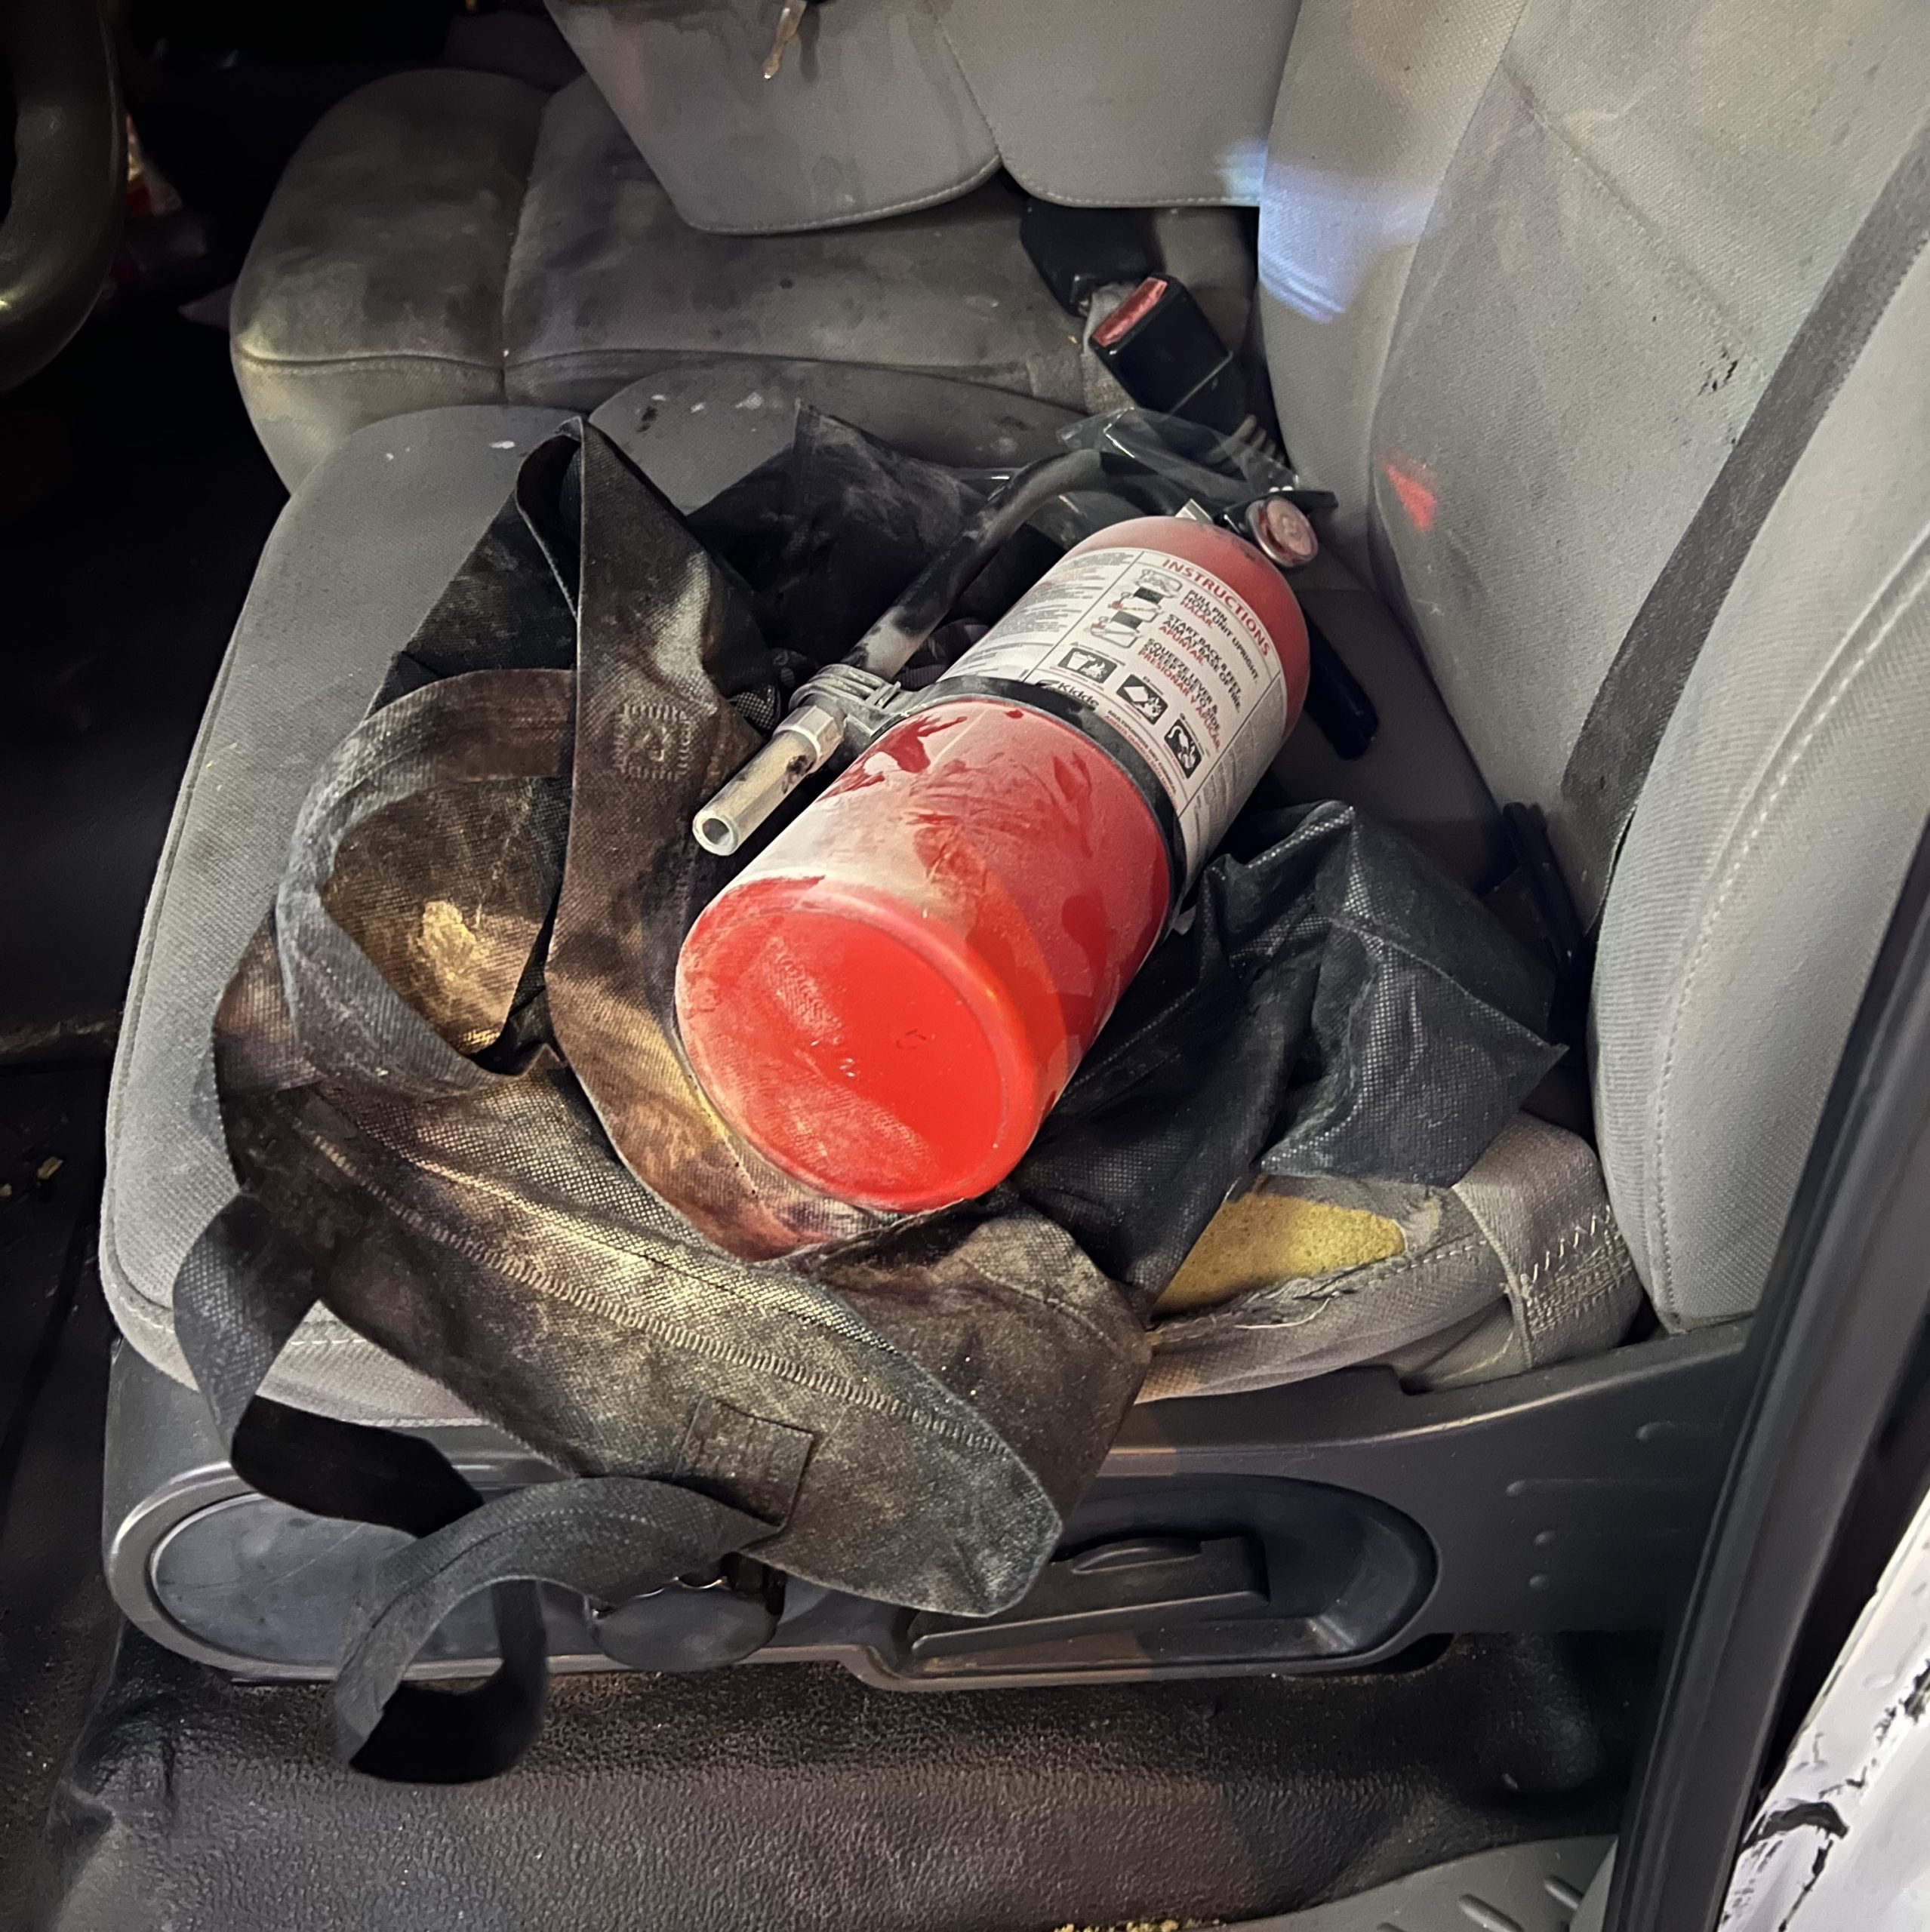 Dusty looking fire extinguisher on a black bag in the back seat of a vehicle